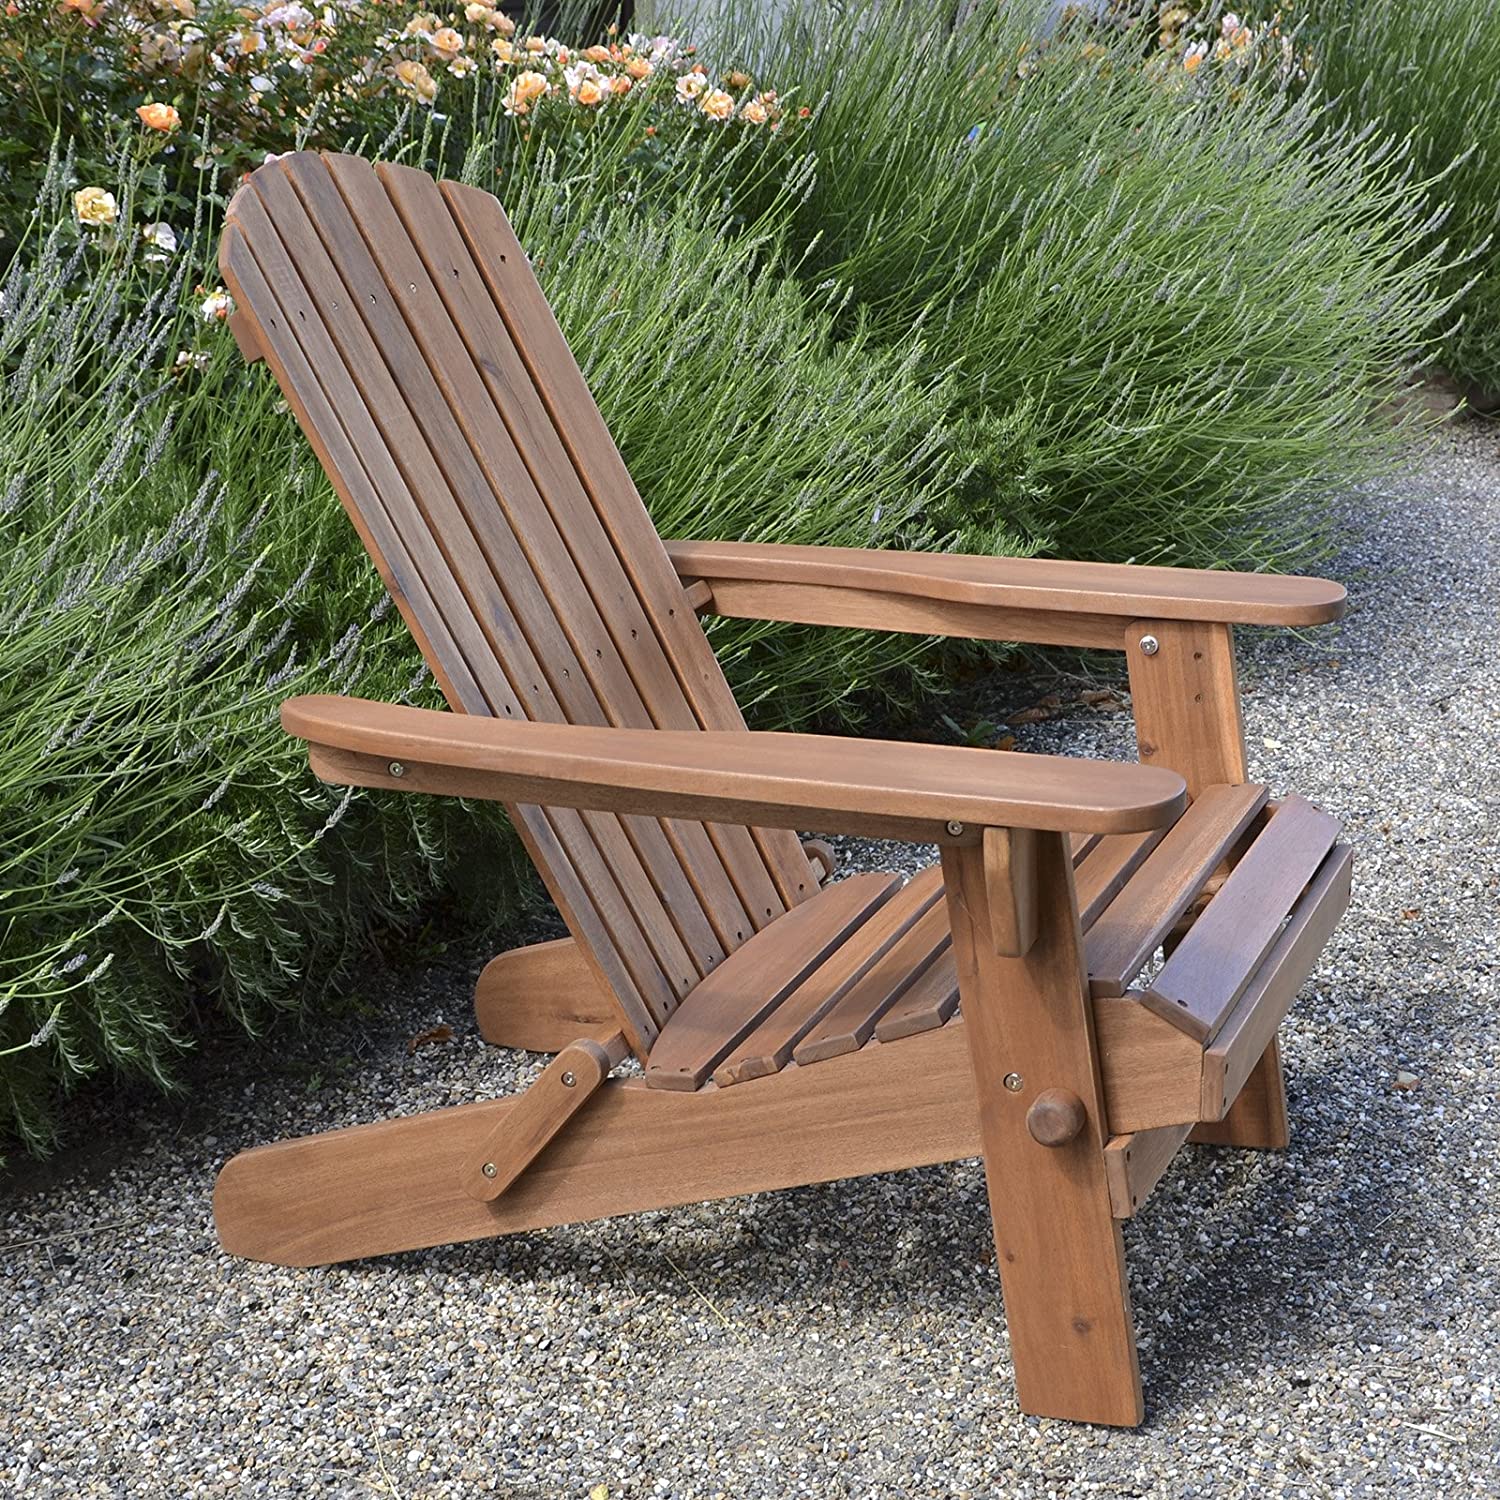 Review of Plant Theatre Adirondack Folding Hardwood Chair